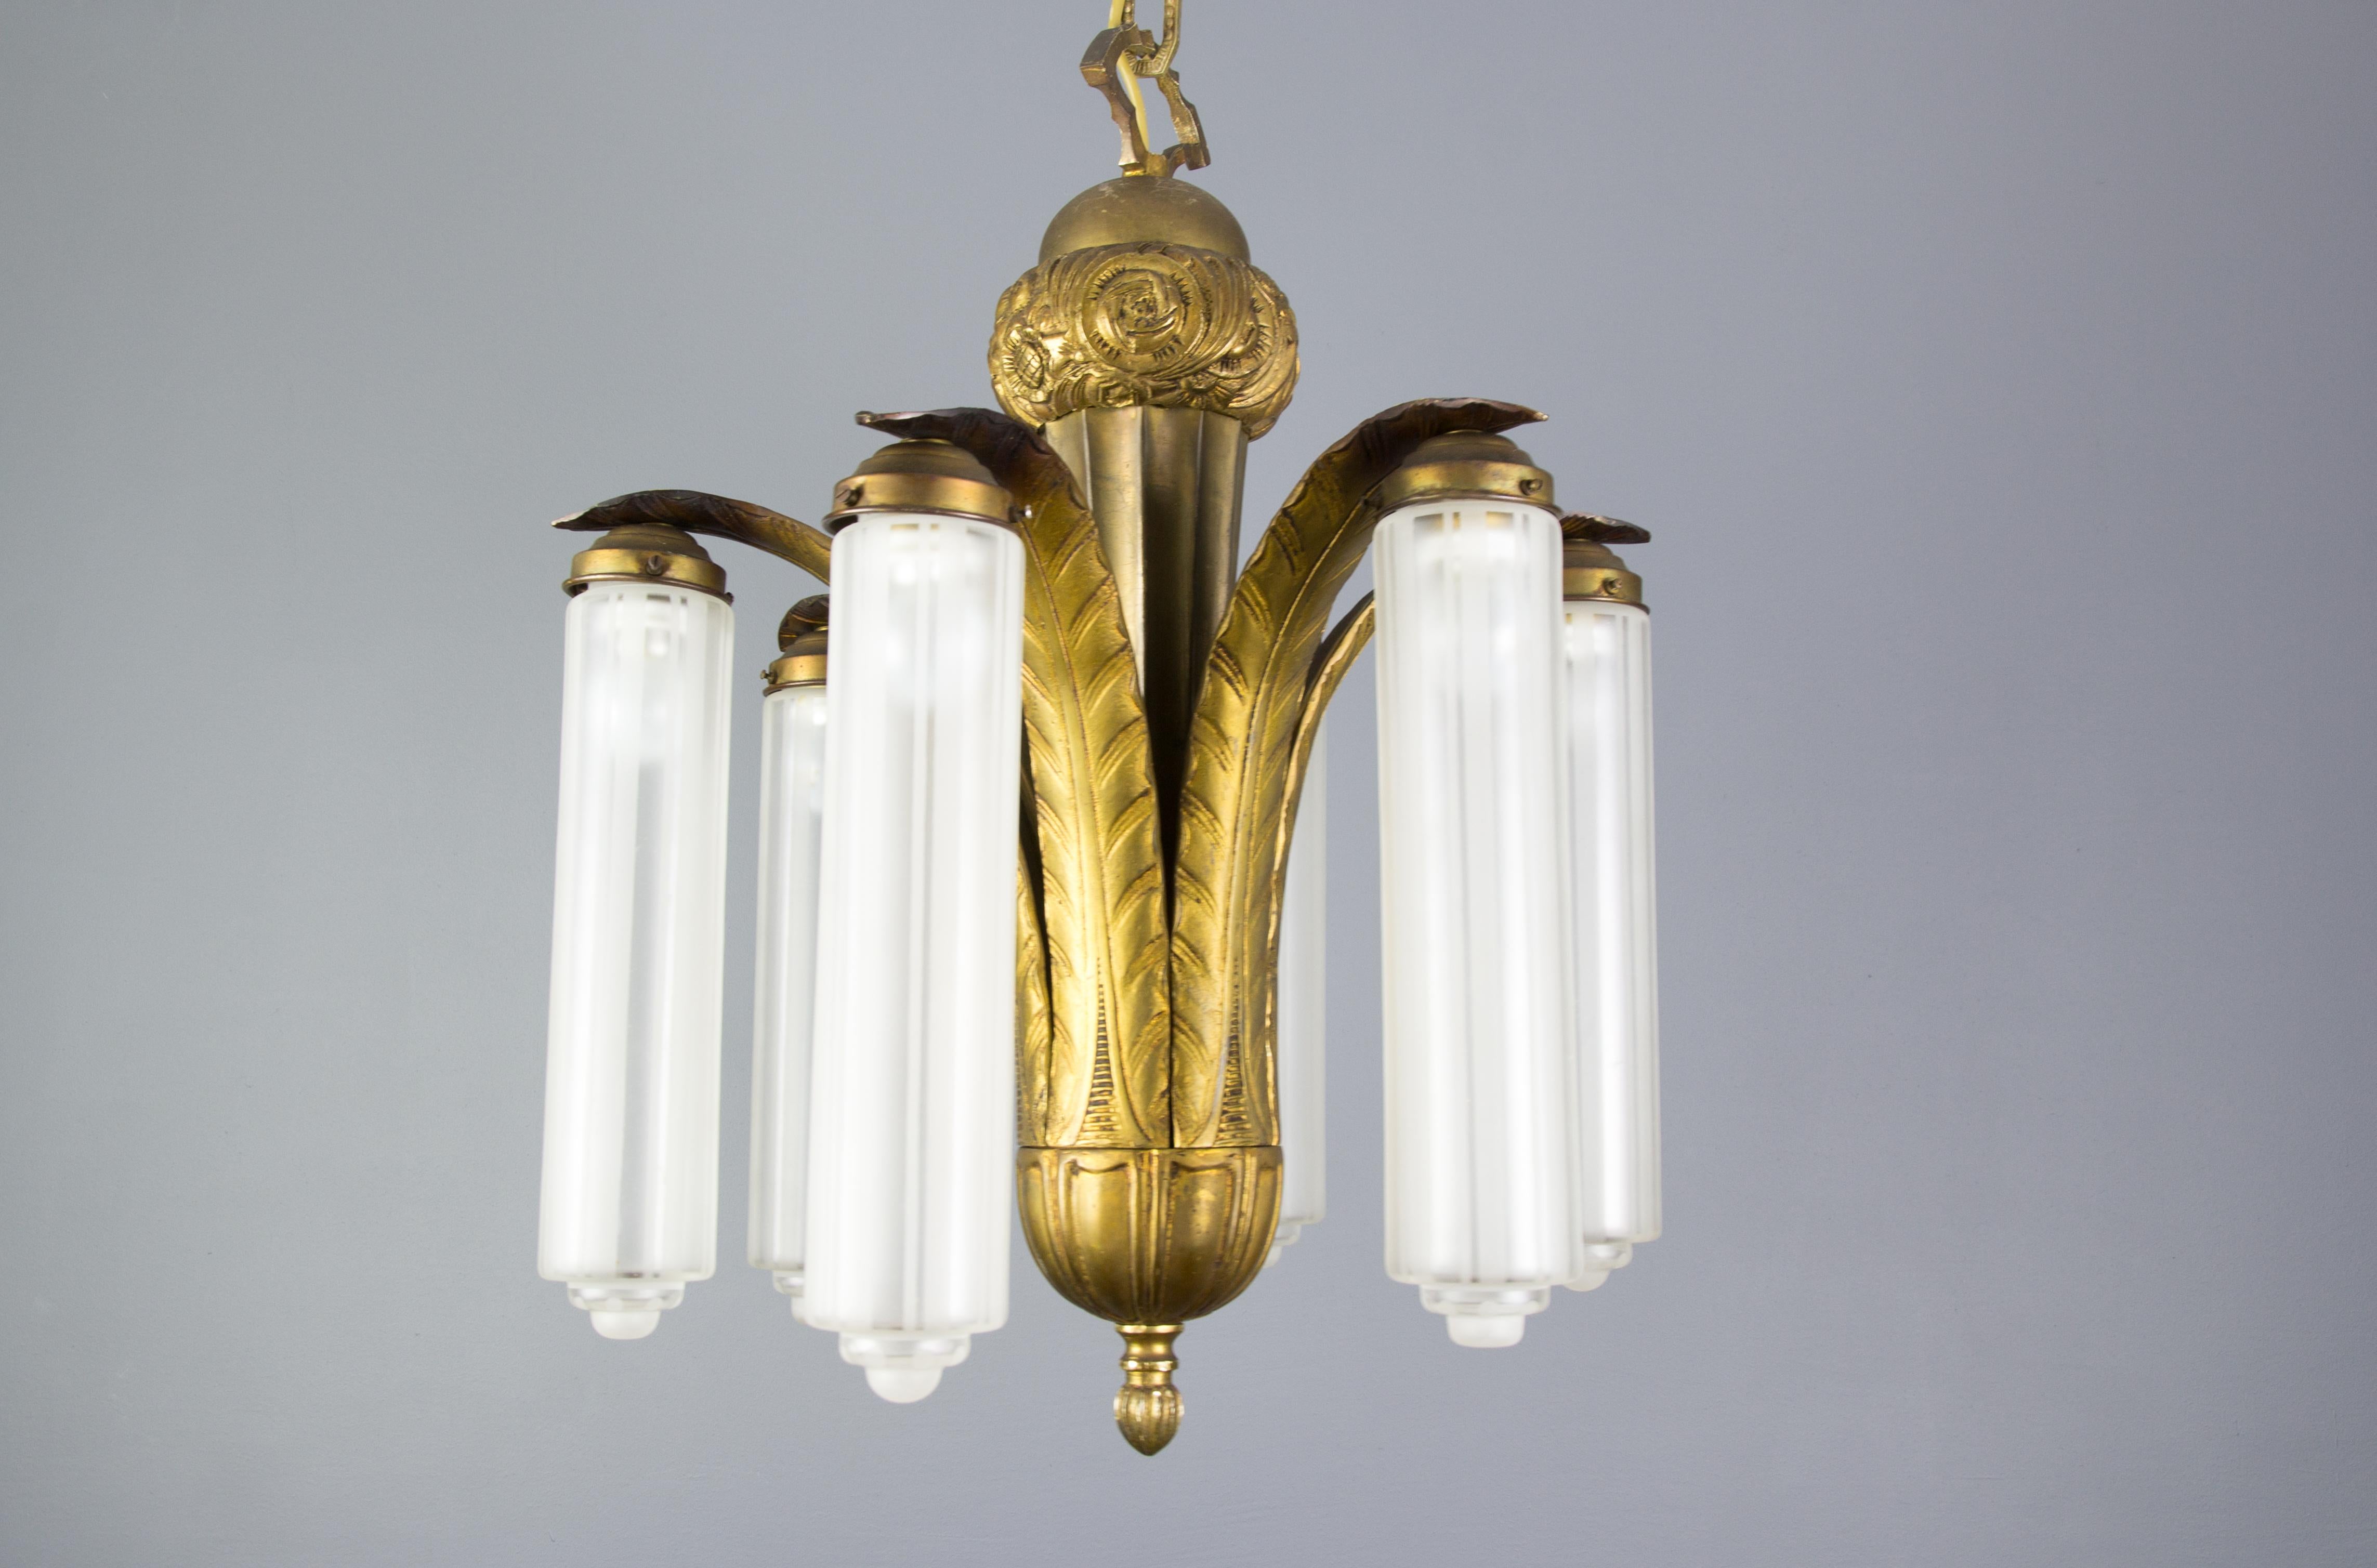 Imposing French Art Deco bronze chandelier from the 1920s. Six bronze arms with six striped
frosted glass lamp shades. Each arm has an original E27 socket with new wiring. 
Free delivery in Germany.
Measures: Total height is 33.5 inches / 85 cm,